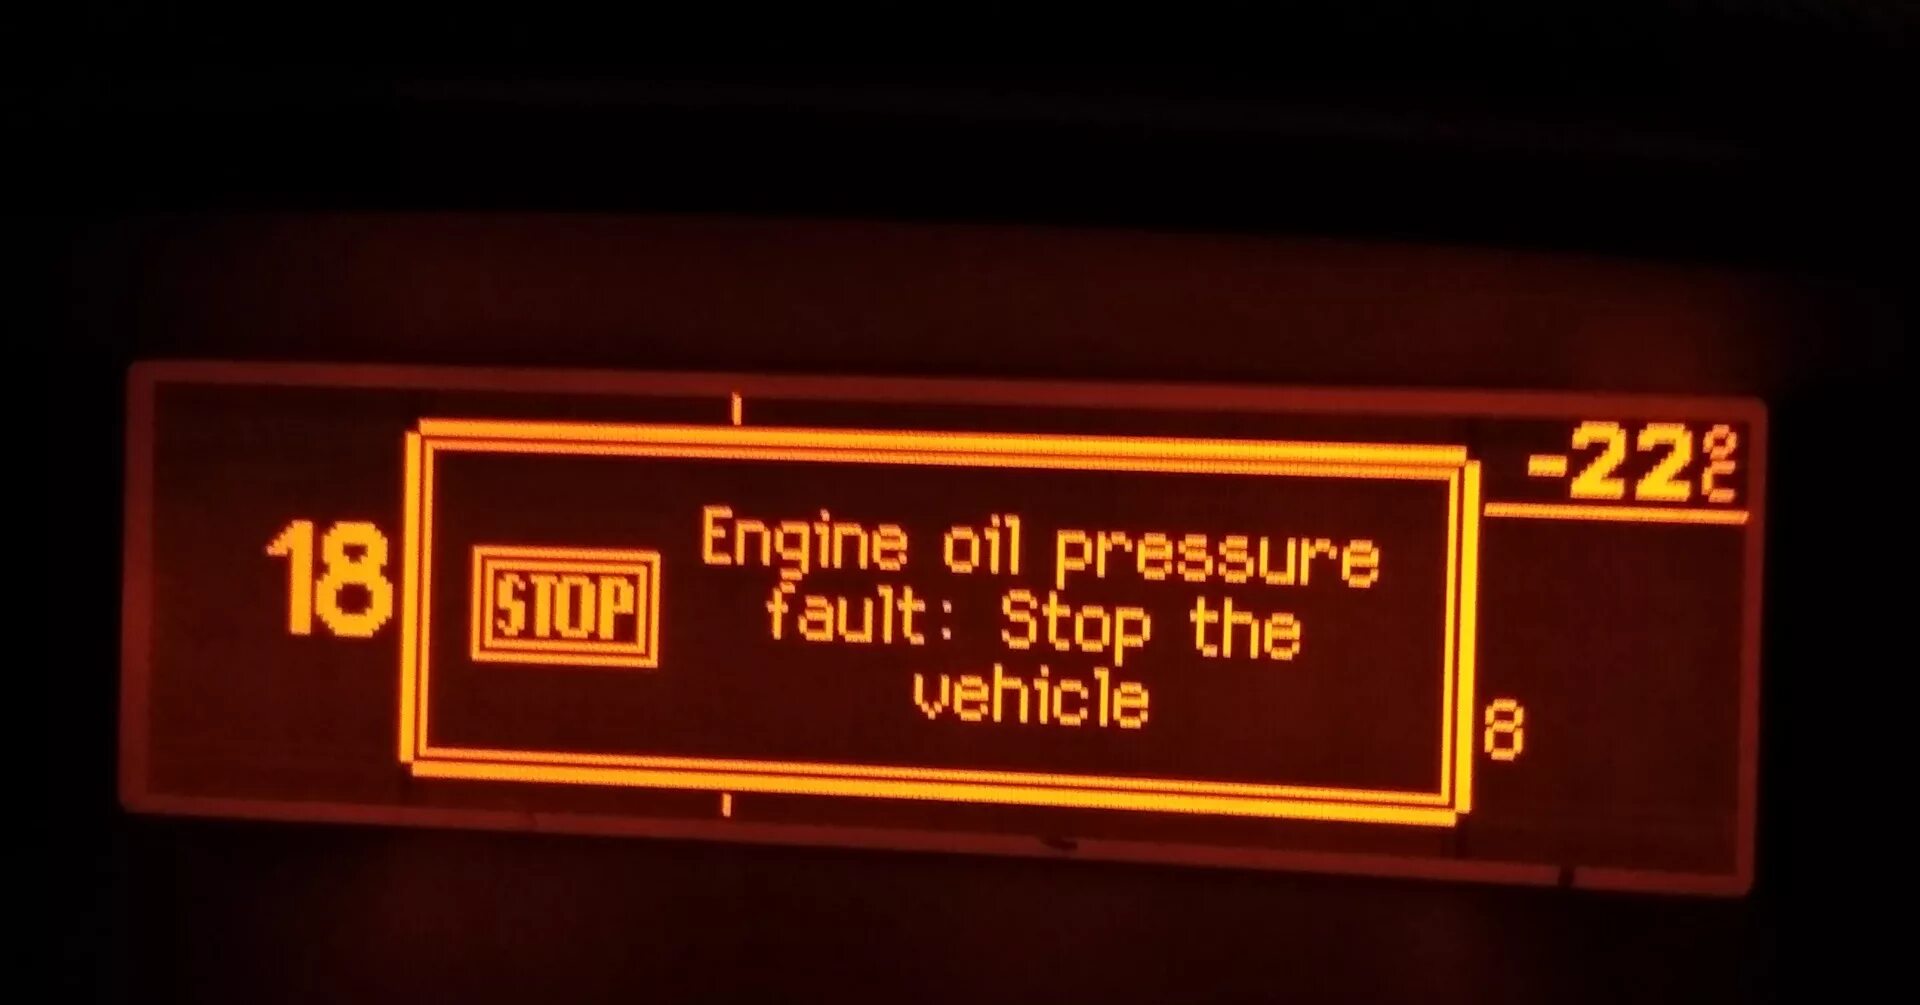 Stop faulted. Engine Oil Pressure Пежо 308. Пежо 308 Energy Oil Pressure. Engine Oil Pressure Fault stop the vehicle Пежо 308. Stop faulty Пежо 308.